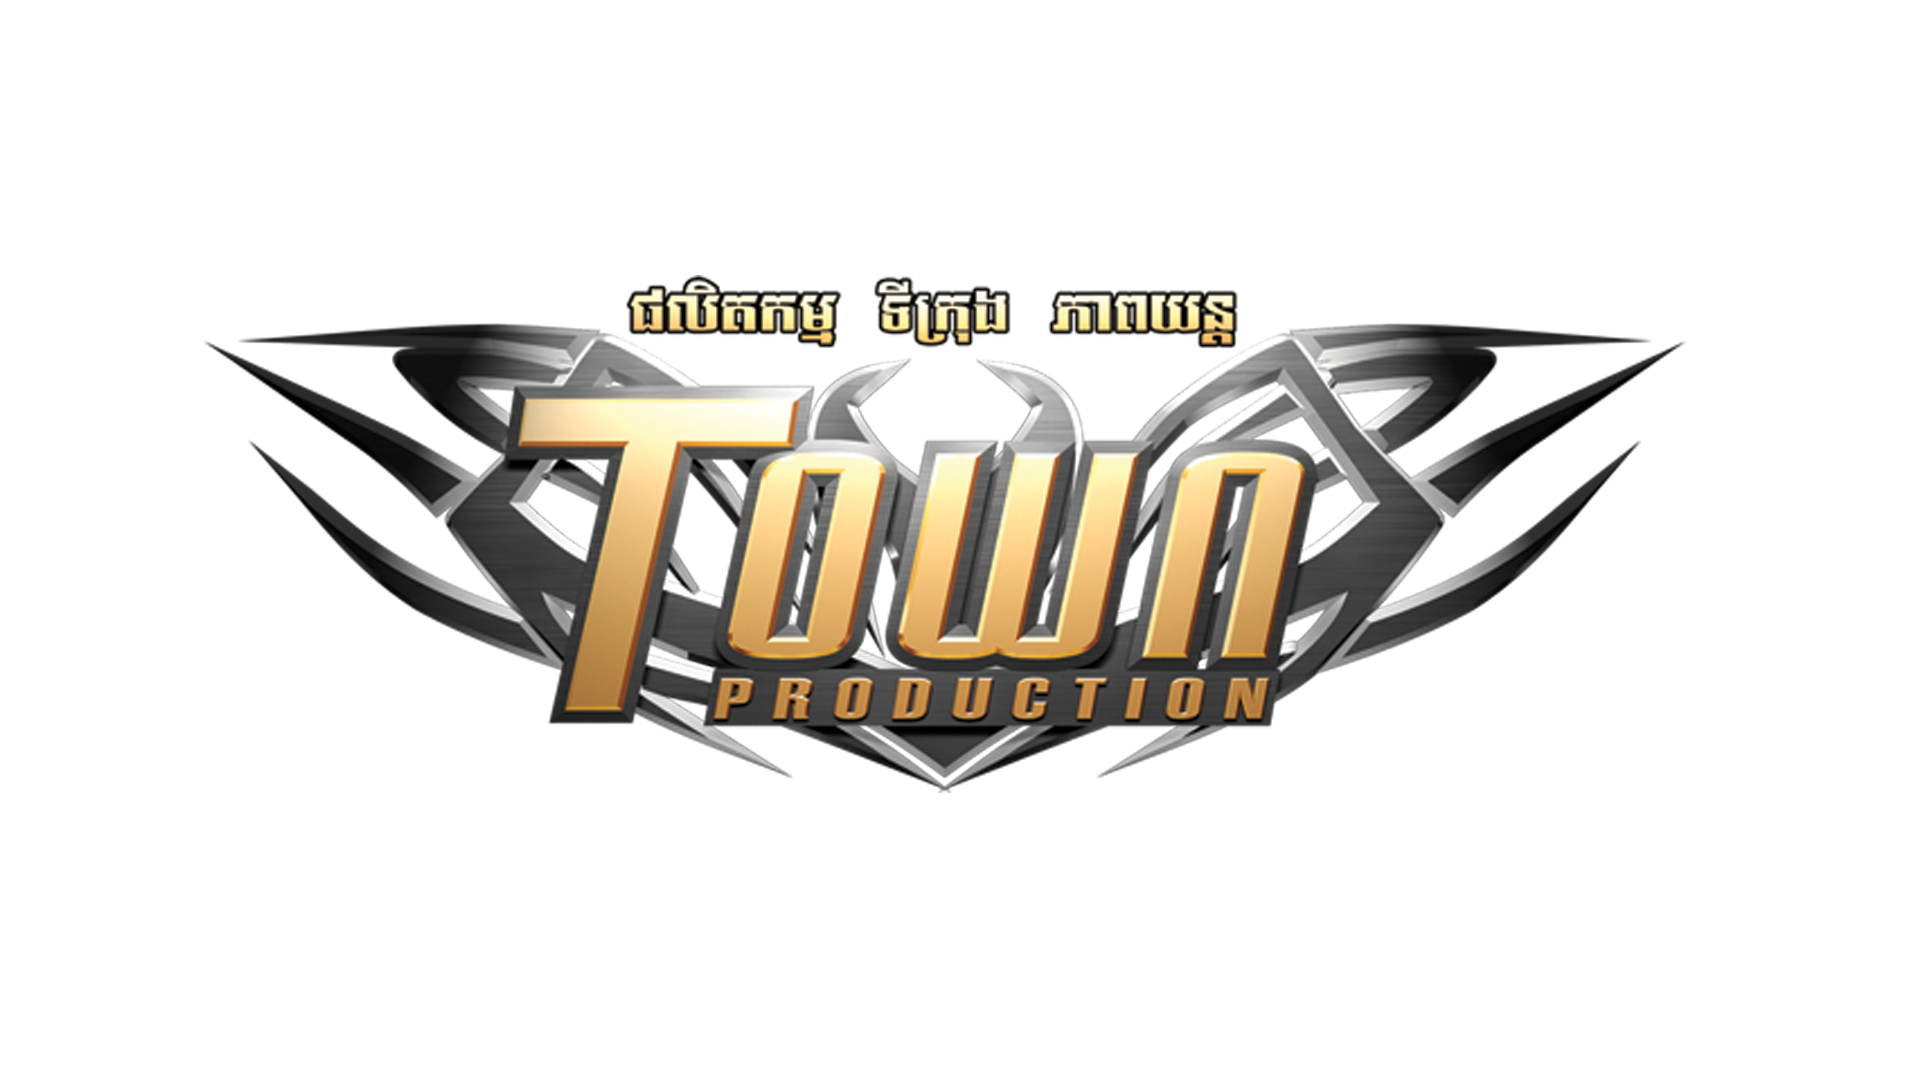 Town Production